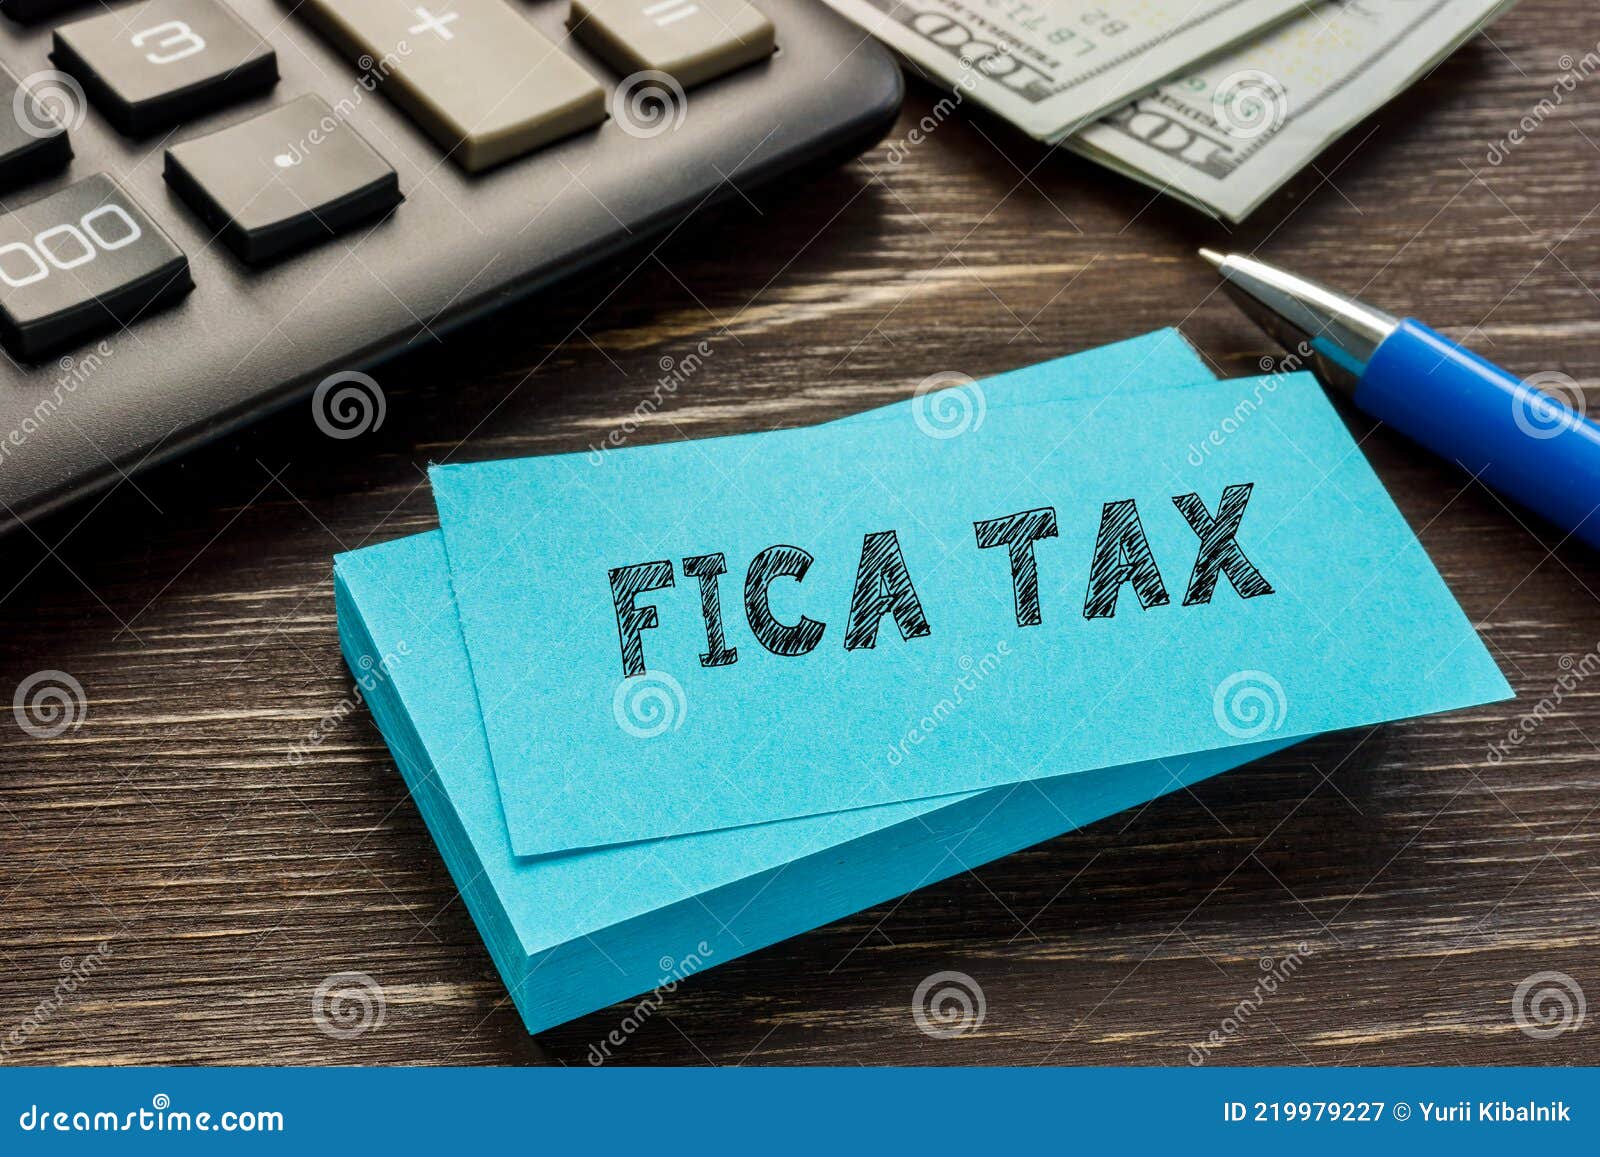 business concept meaning fica tax federal insurance contributions act with sign on the page